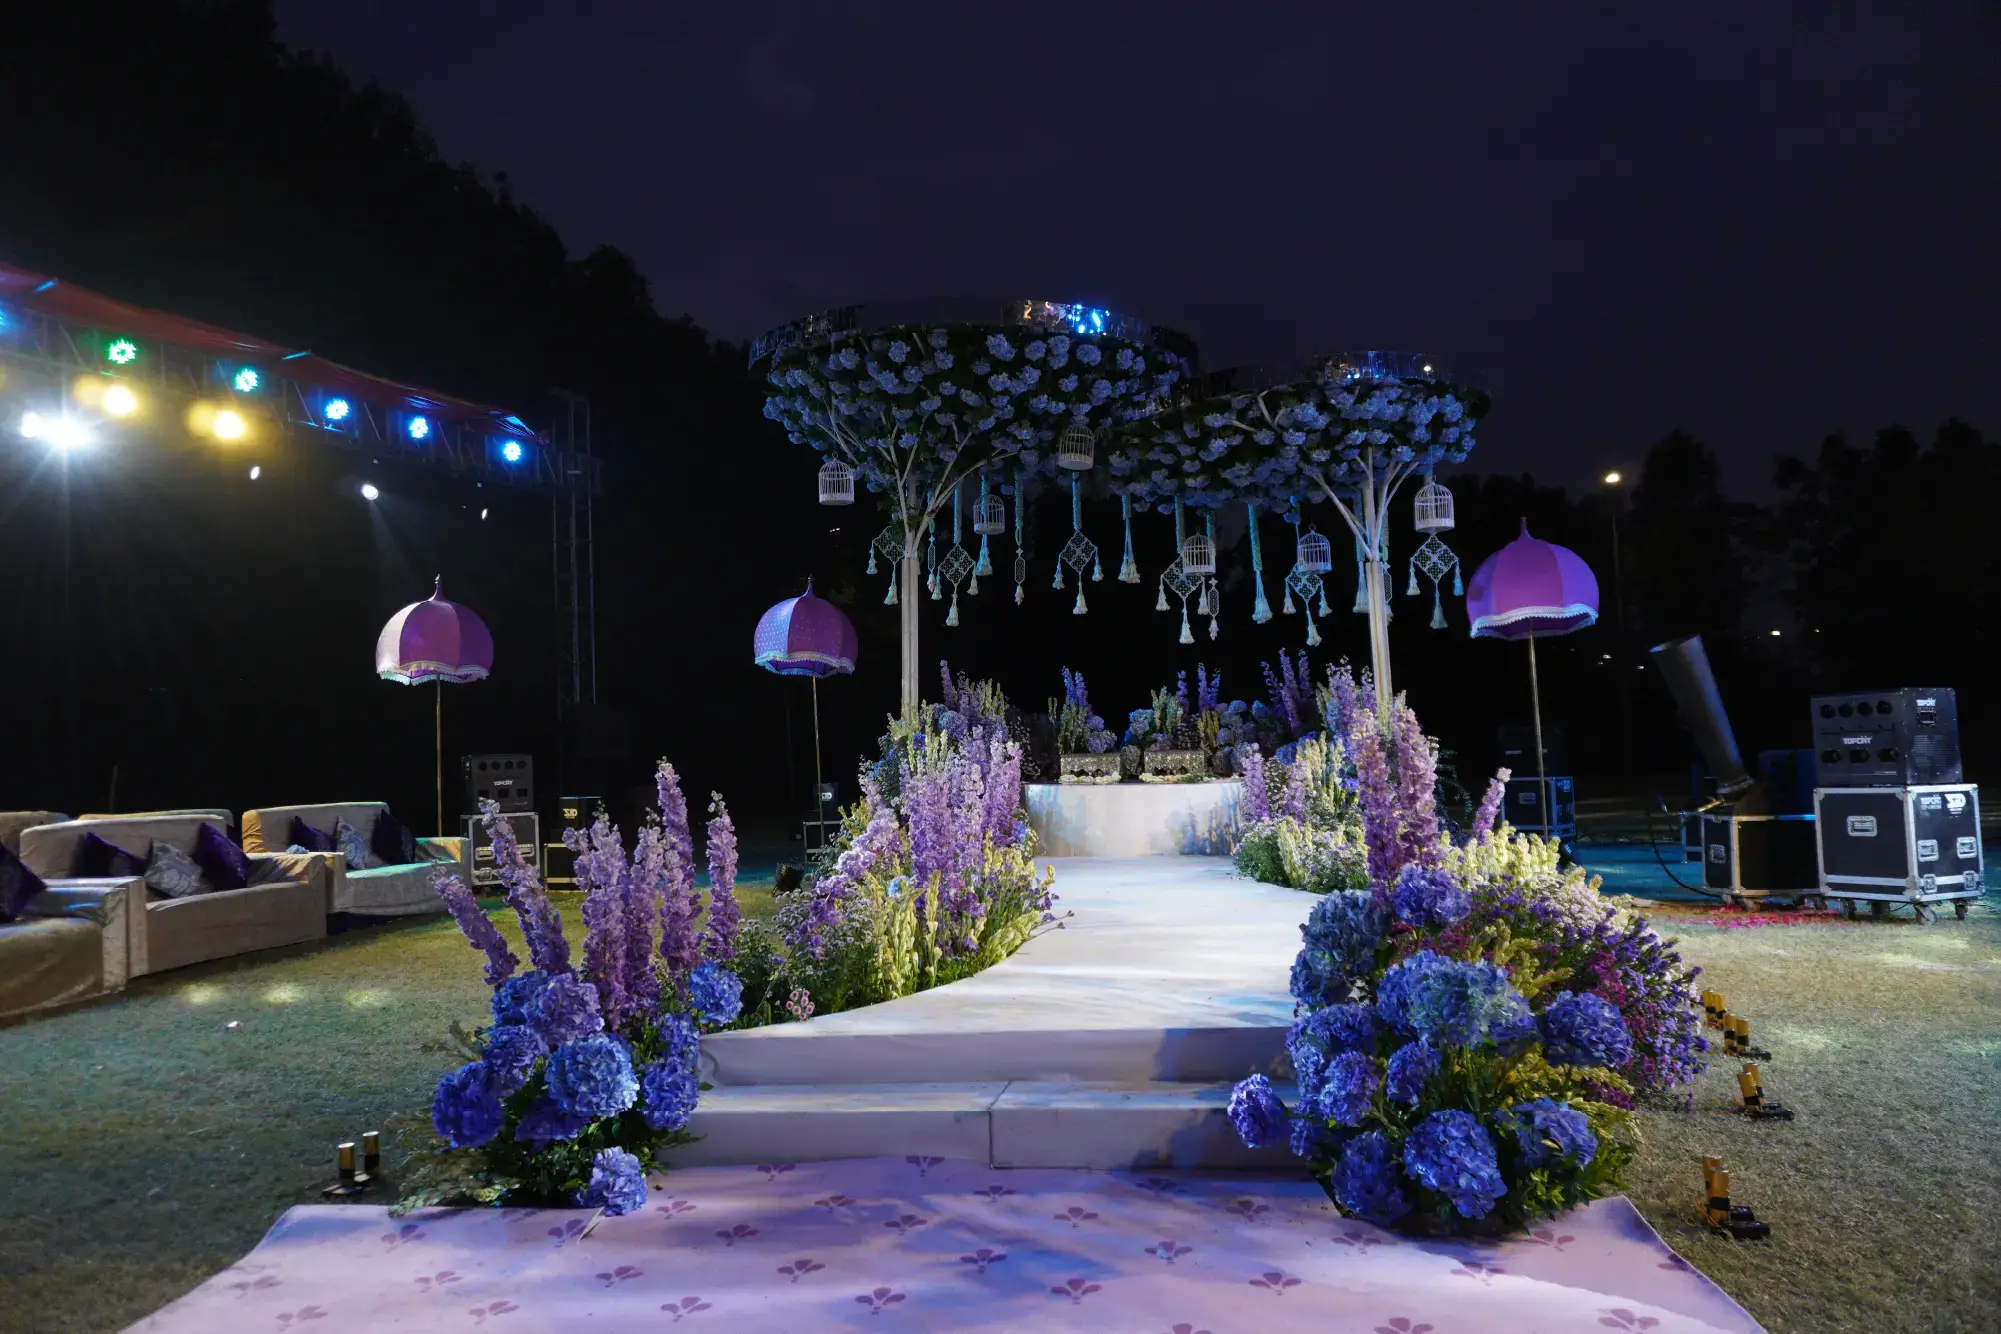 Mandap - Behind the Scenes at a Fairy Tale Wedding | Events from Black Tulip Flowers